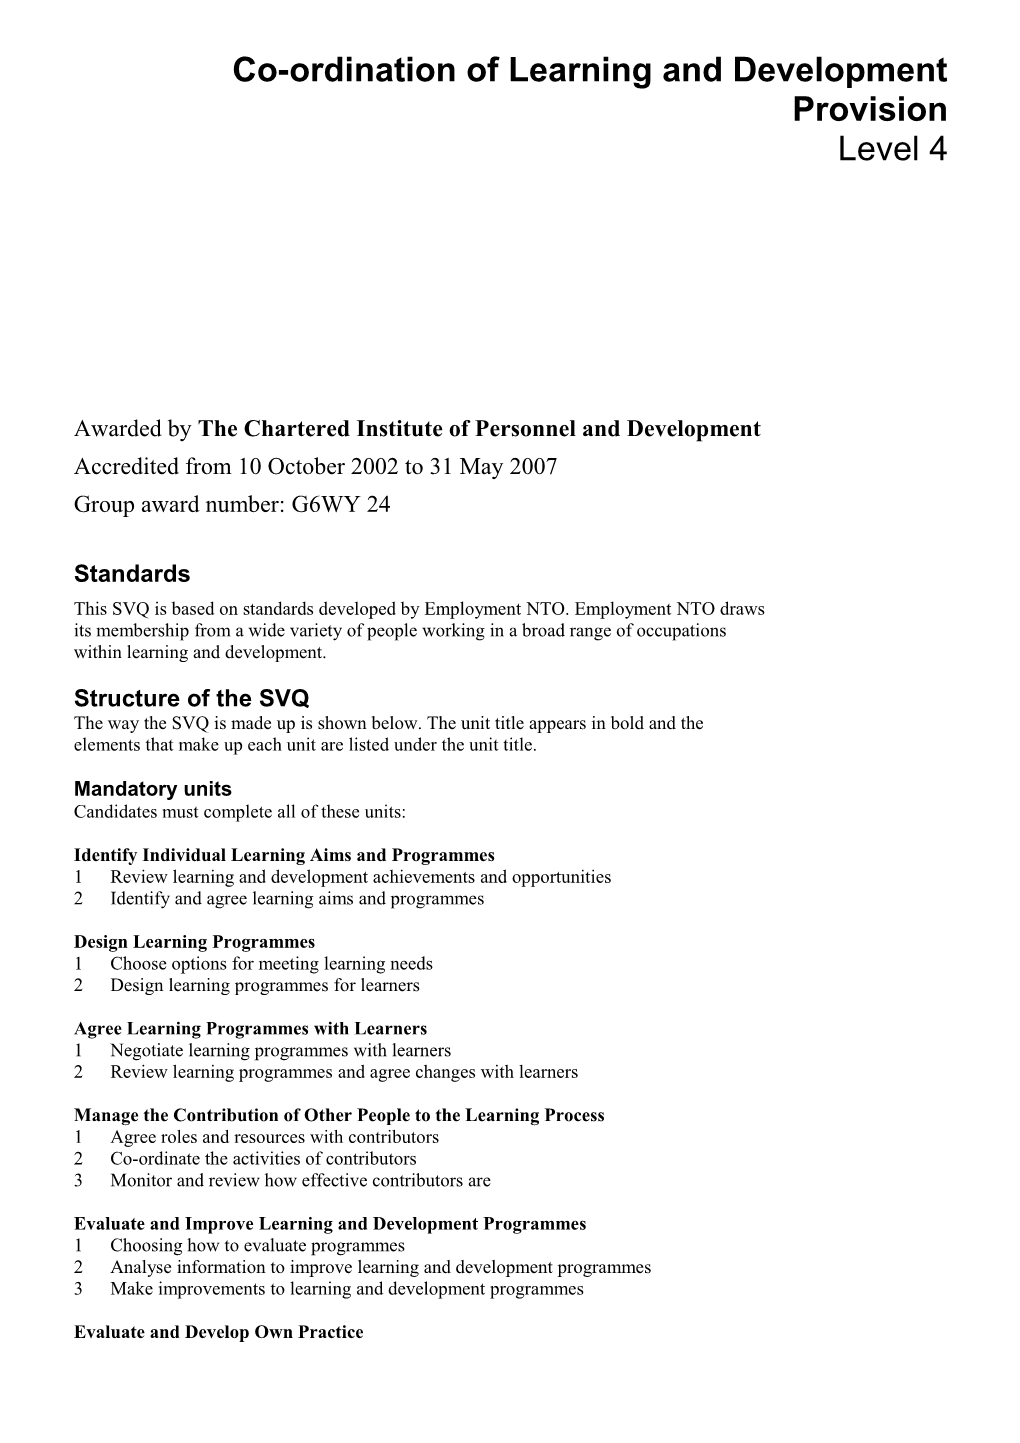 Co-Ordination of Learning and Development Provision